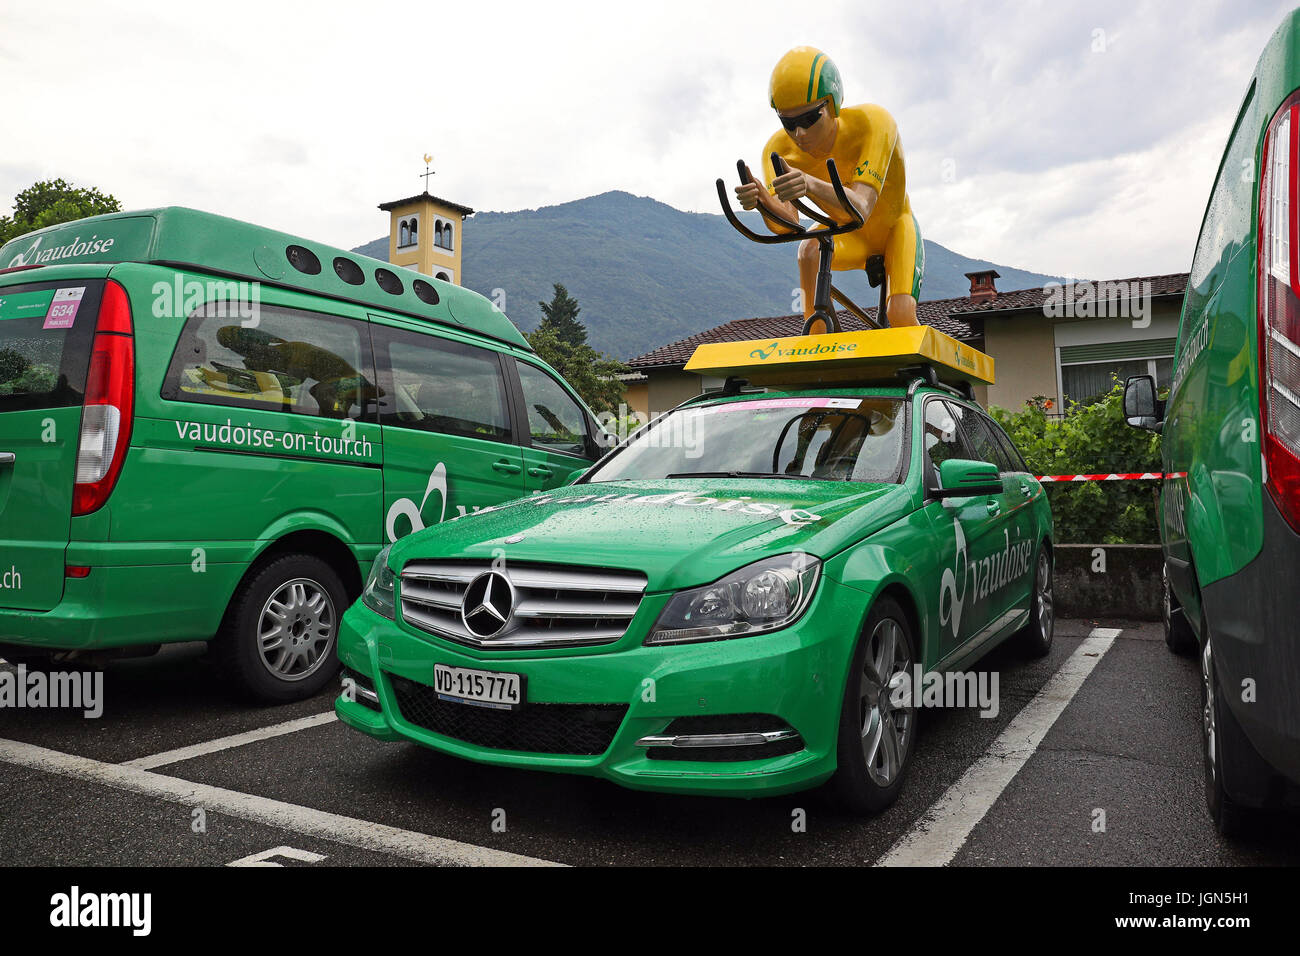 Ascona, Ticino, Switzerland, June 14, 2017: wet Vaudoise main sponsor vehicles parked in Ascona at the end of the first leg of the 2017 Tour de Suisse Stock Photo